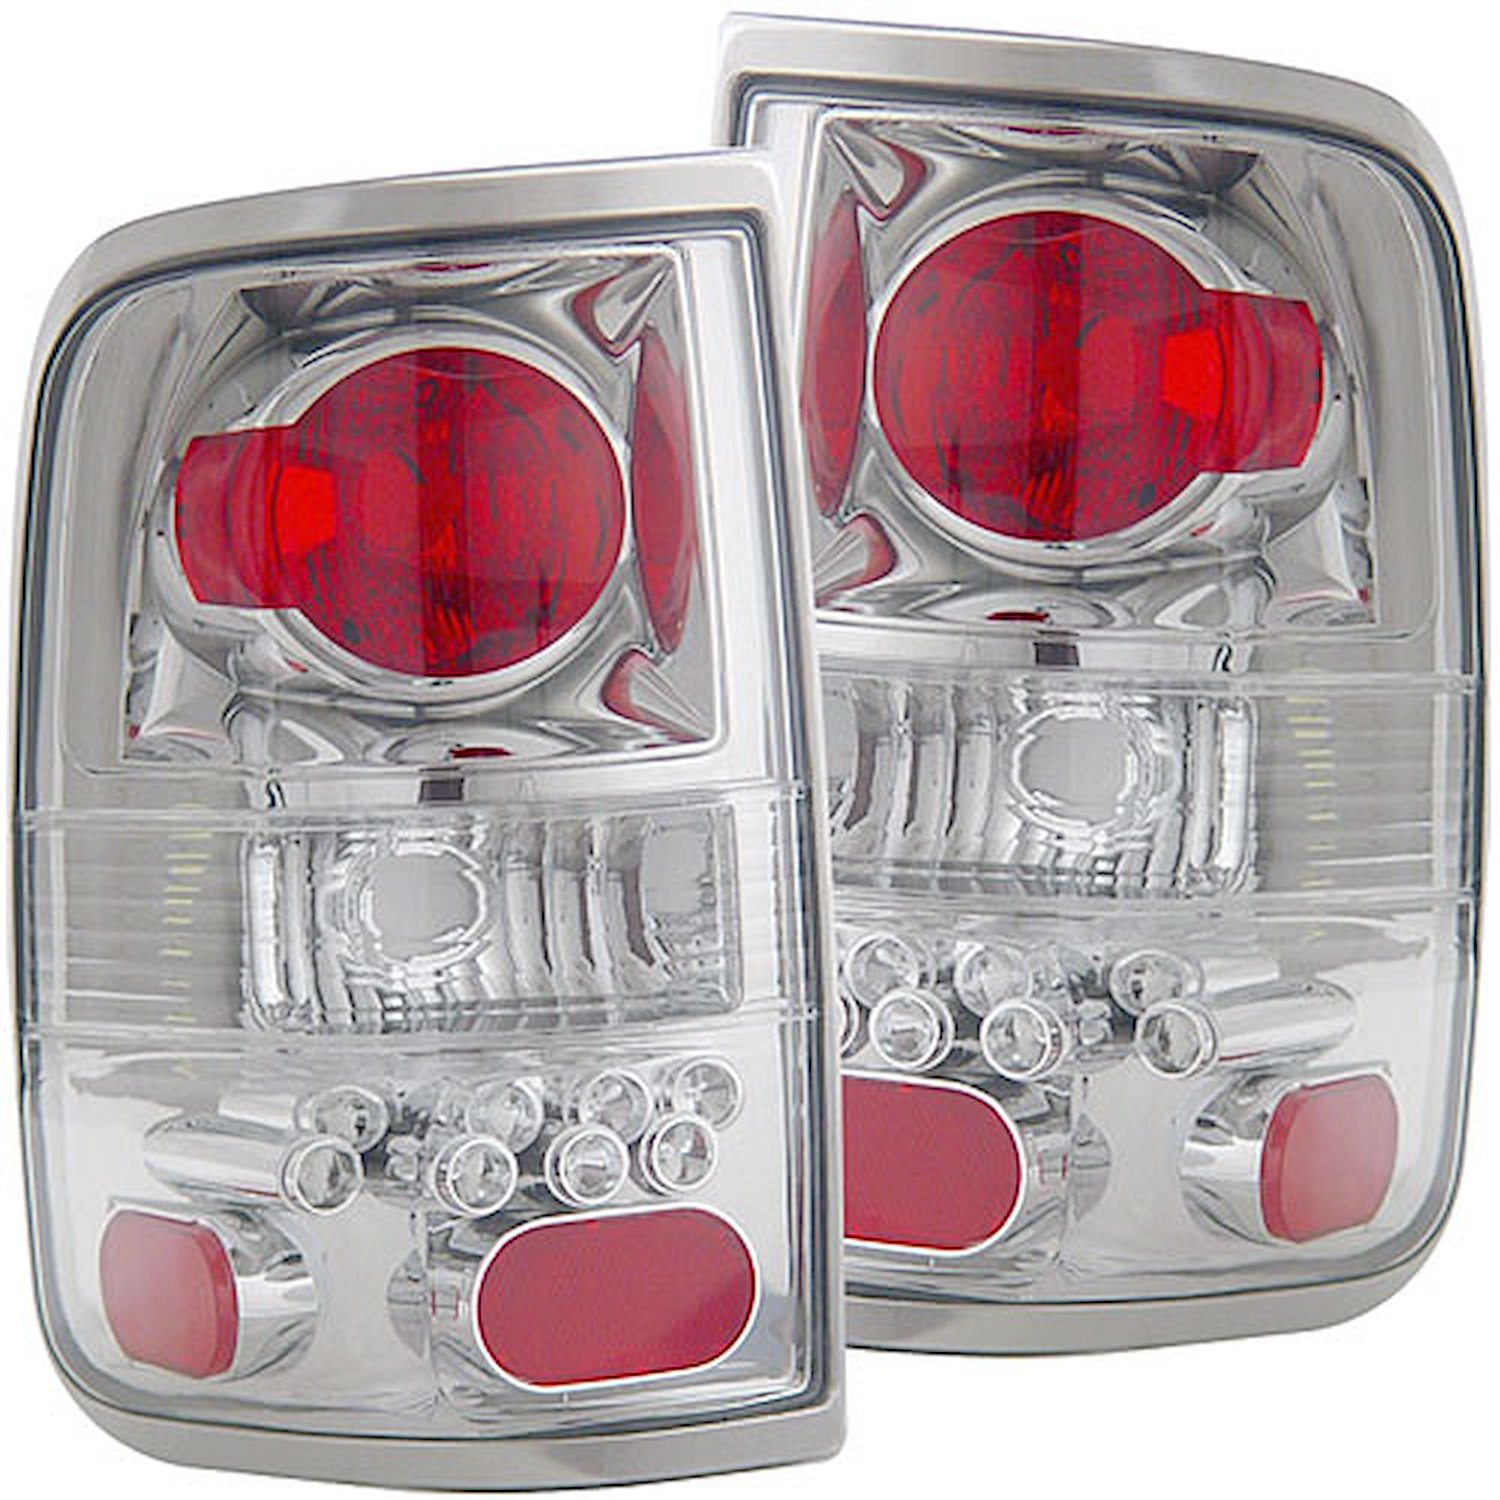 2004-2008 Ford F-150 LED Taillights